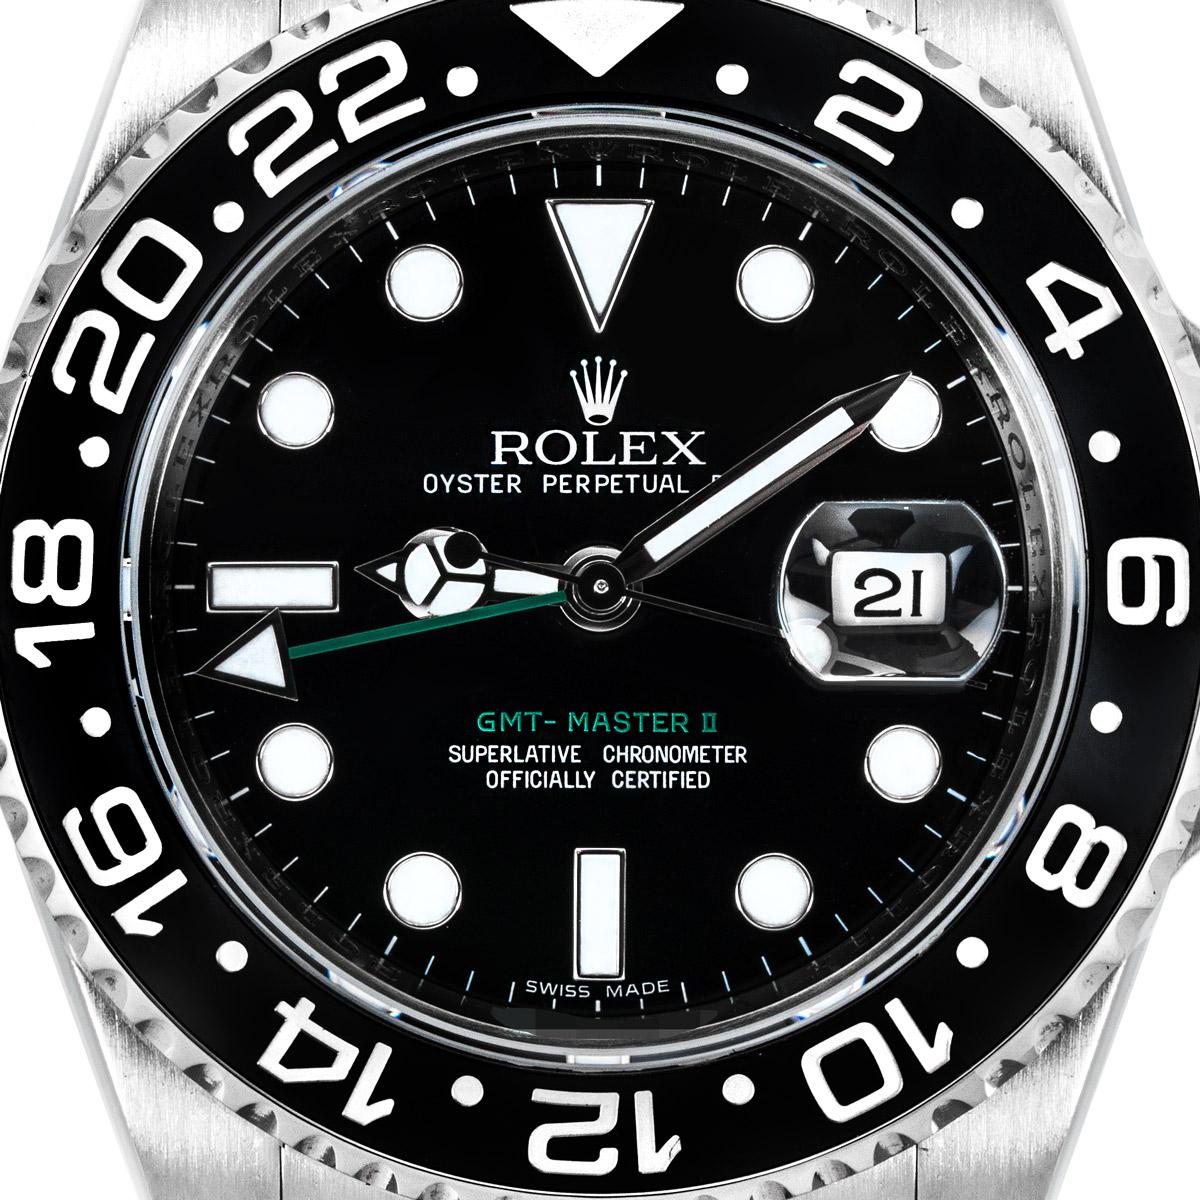 A mens stainless steel GMT-Master II by Rolex. Featuring a black dial with a date aperture and a green second-time zone hand. The bi-directional rotatable bezel features a 24-hour display on the ceramic insert.

Equipped with an Oyster bracelet and